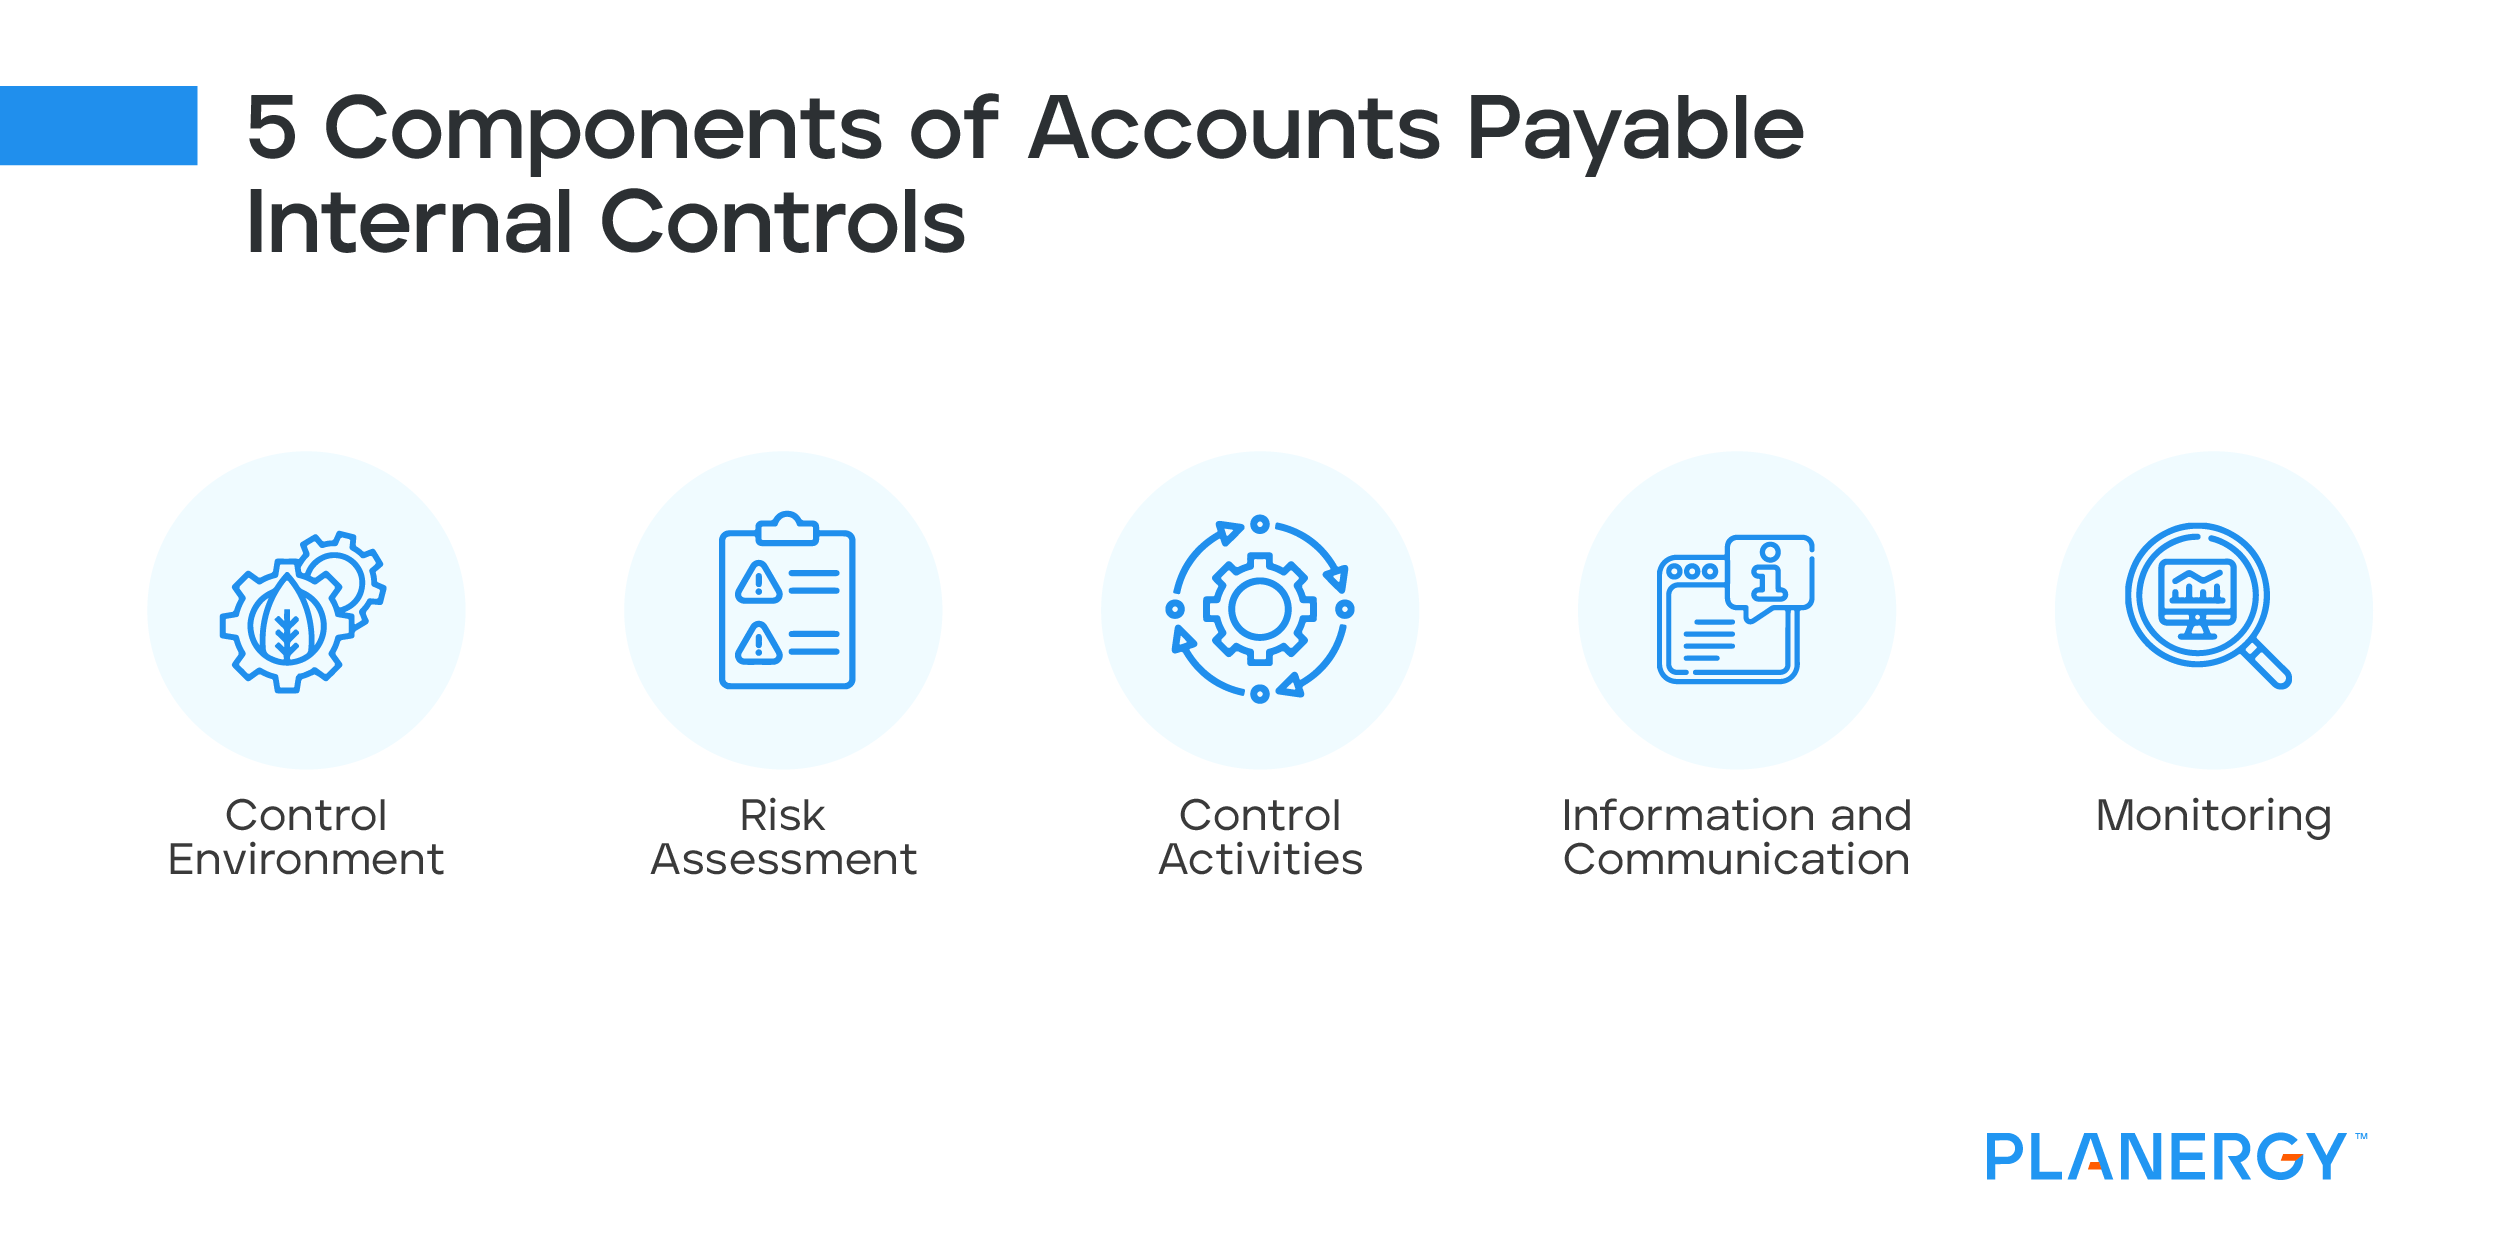 5 Components of Accounts Payable Internal Controls